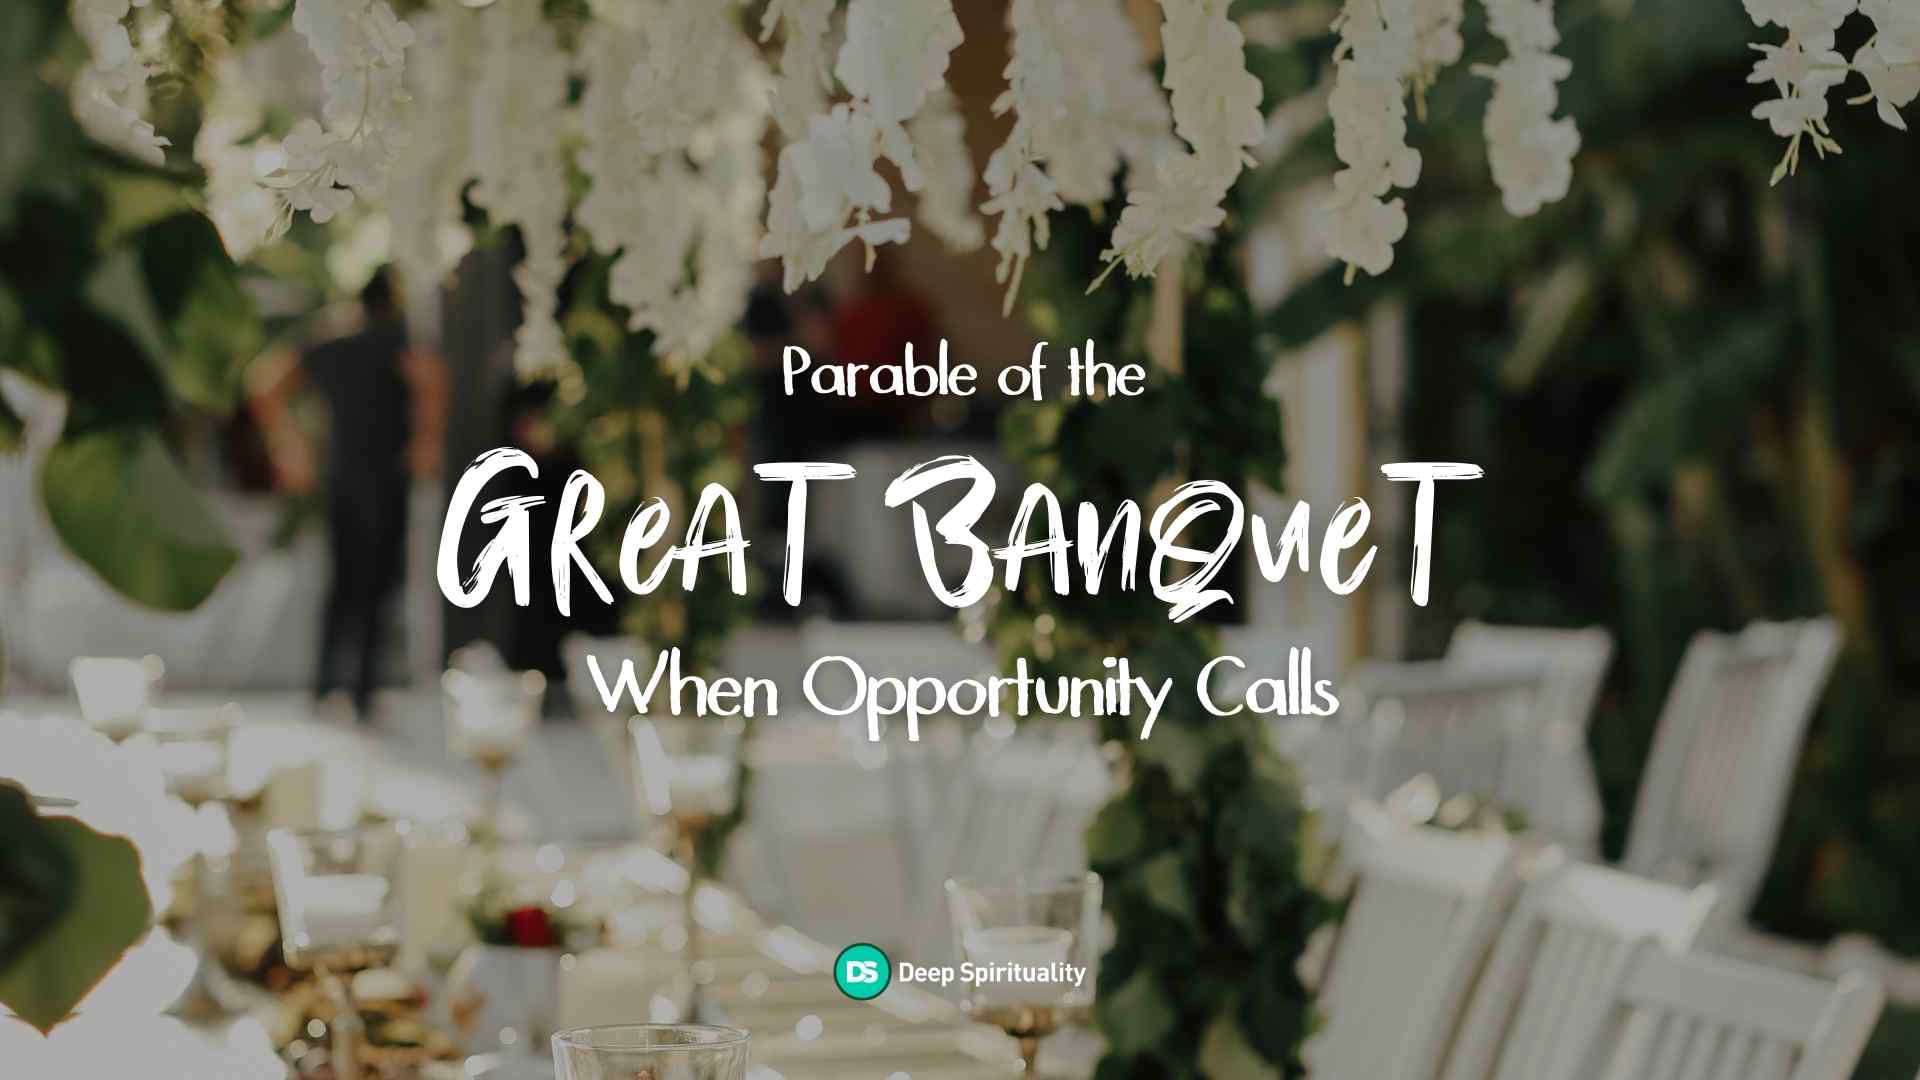 Parable of the Great Banquet: When Opportunity Calls 1